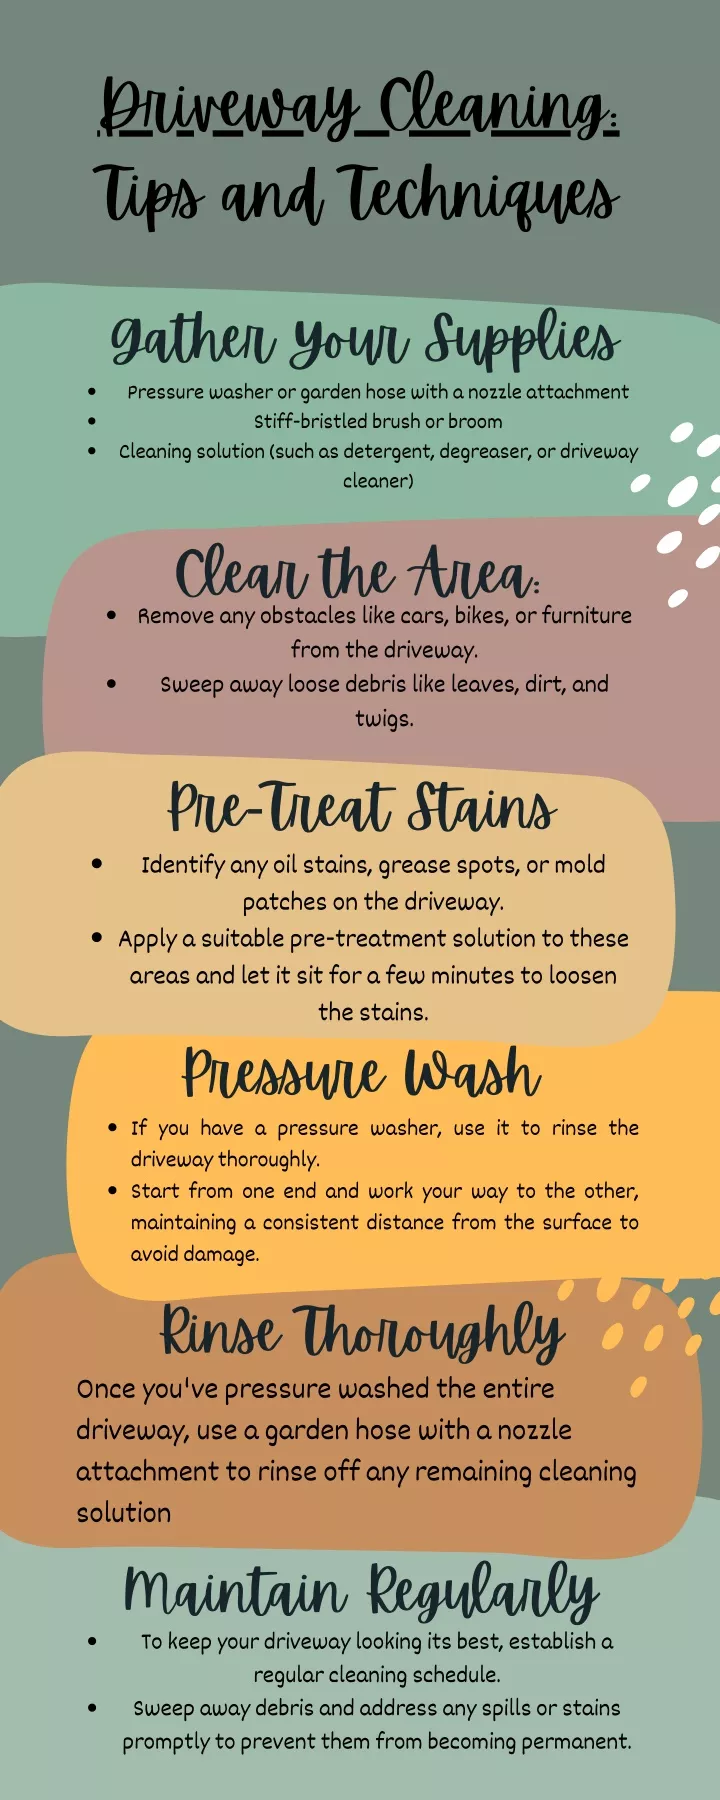 driveway cleaning tips and techniques